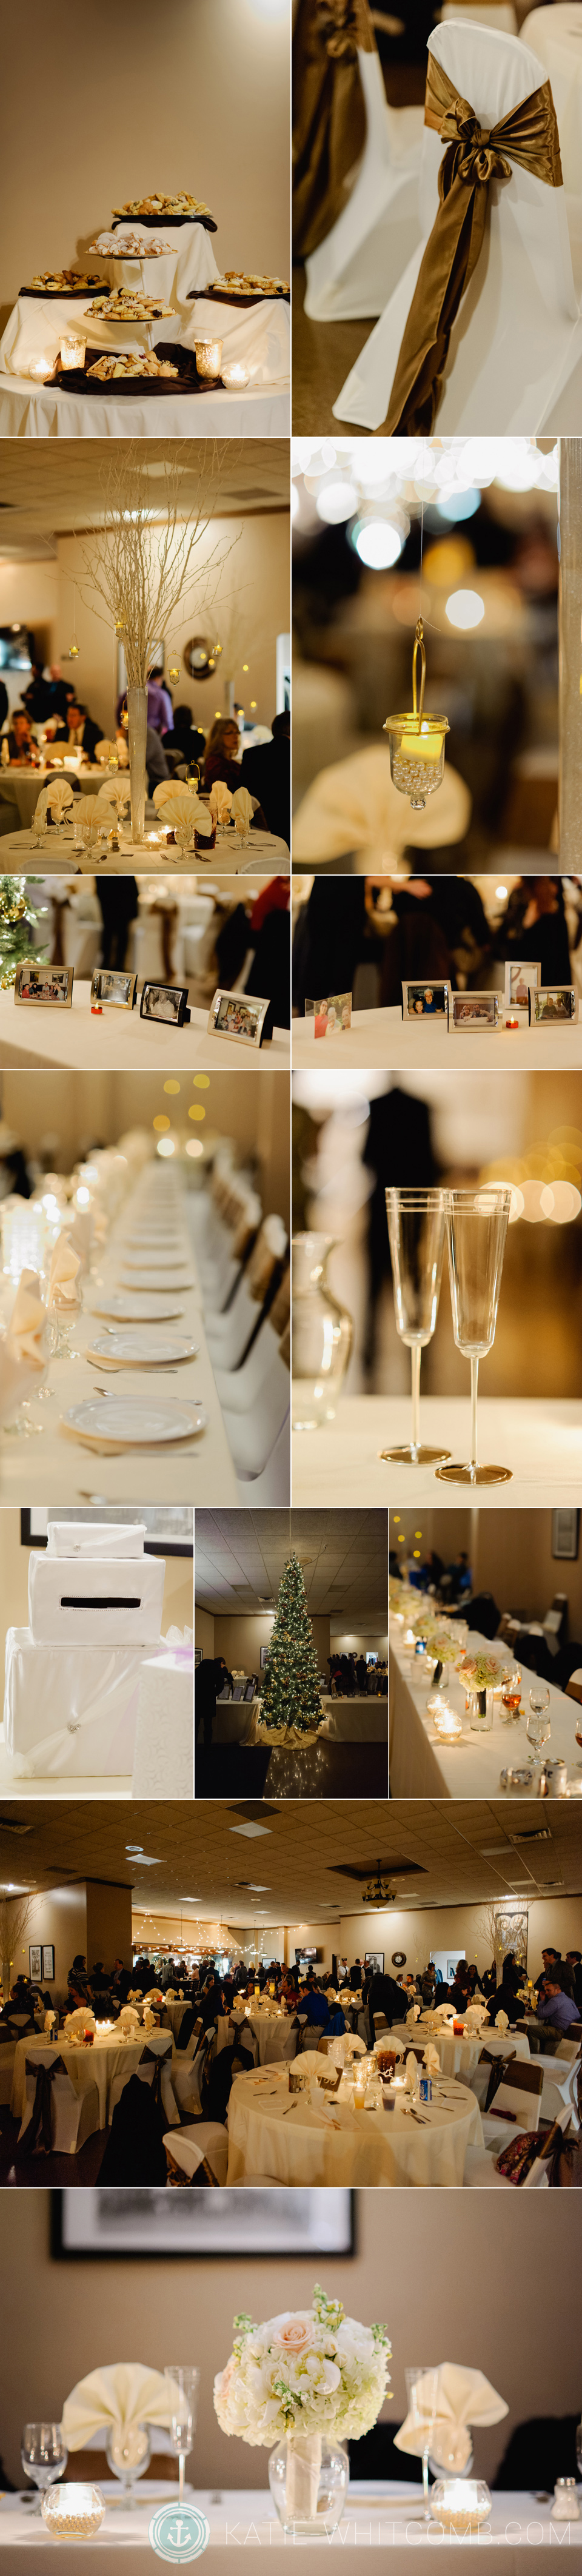 white, cream and antique gold winter wedding details at a reception in South Bend, IN